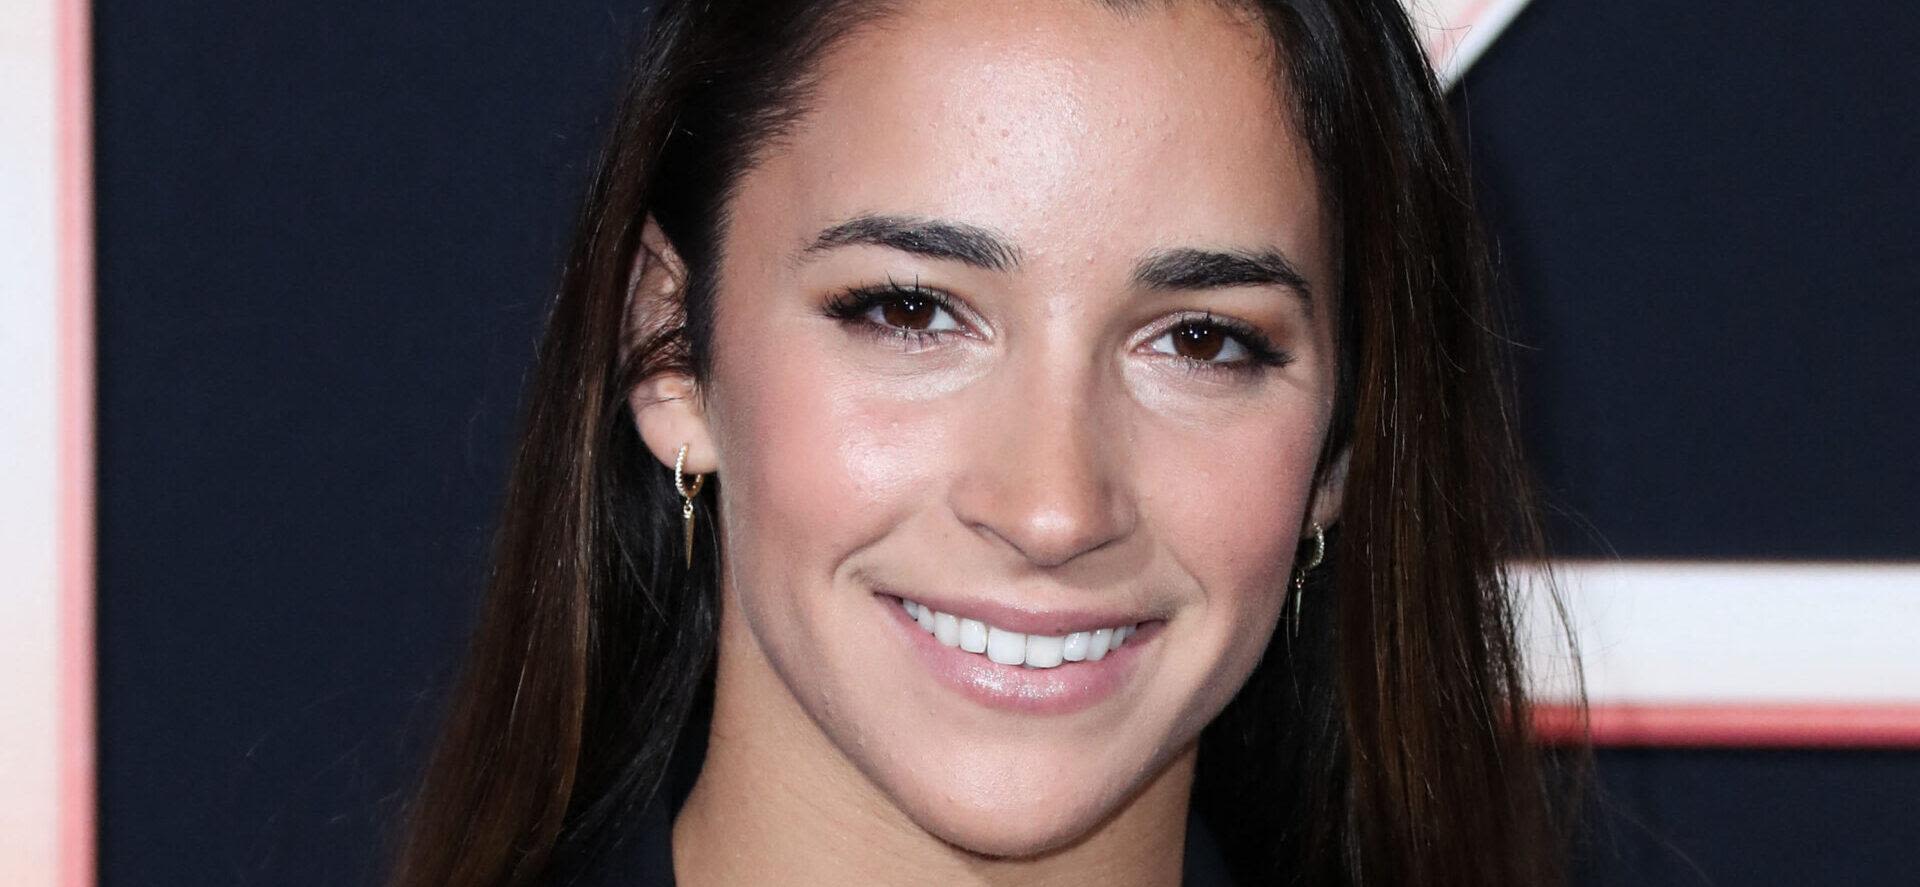 Olympian Aly Raisman Reveals One Of Her 'Most Proud Moments'